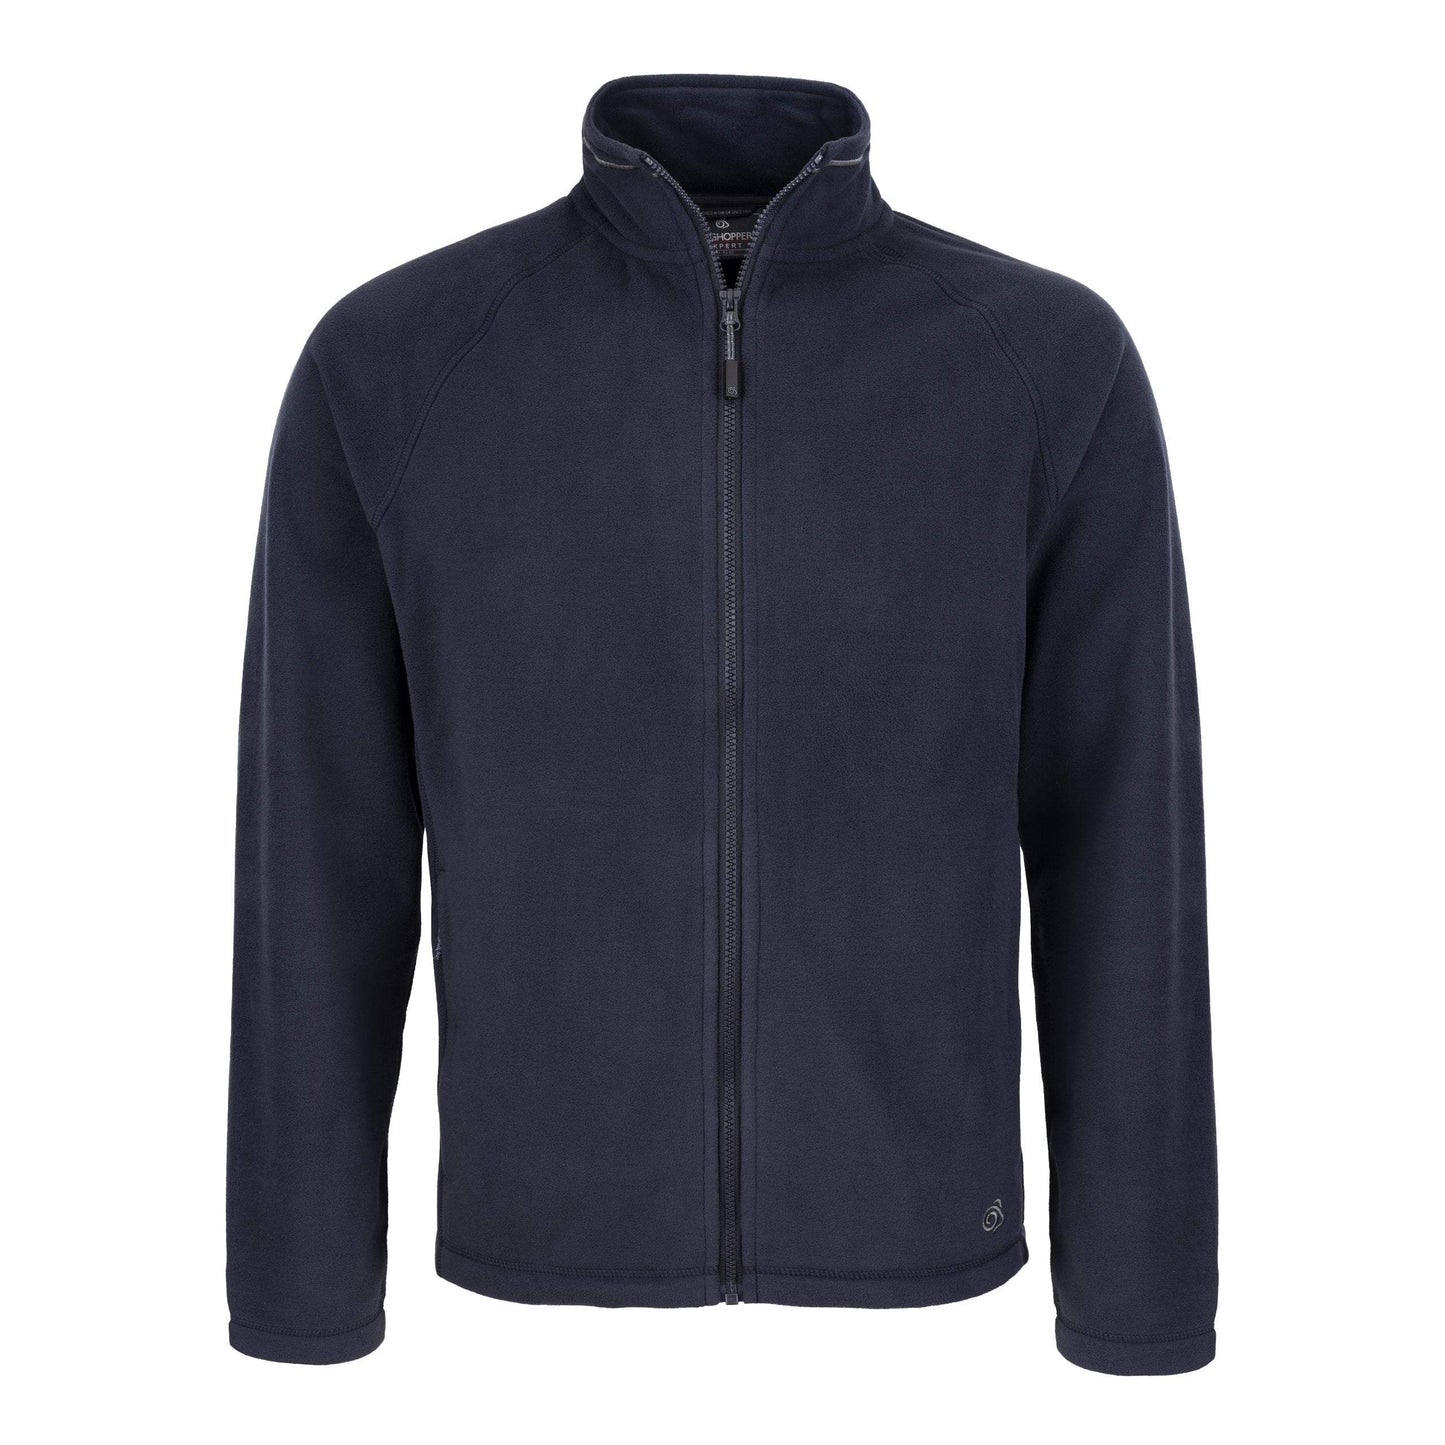 Men’s Expert Corey 200 Fleece Jacket by Craghoppers - Promotions Only Group Limited